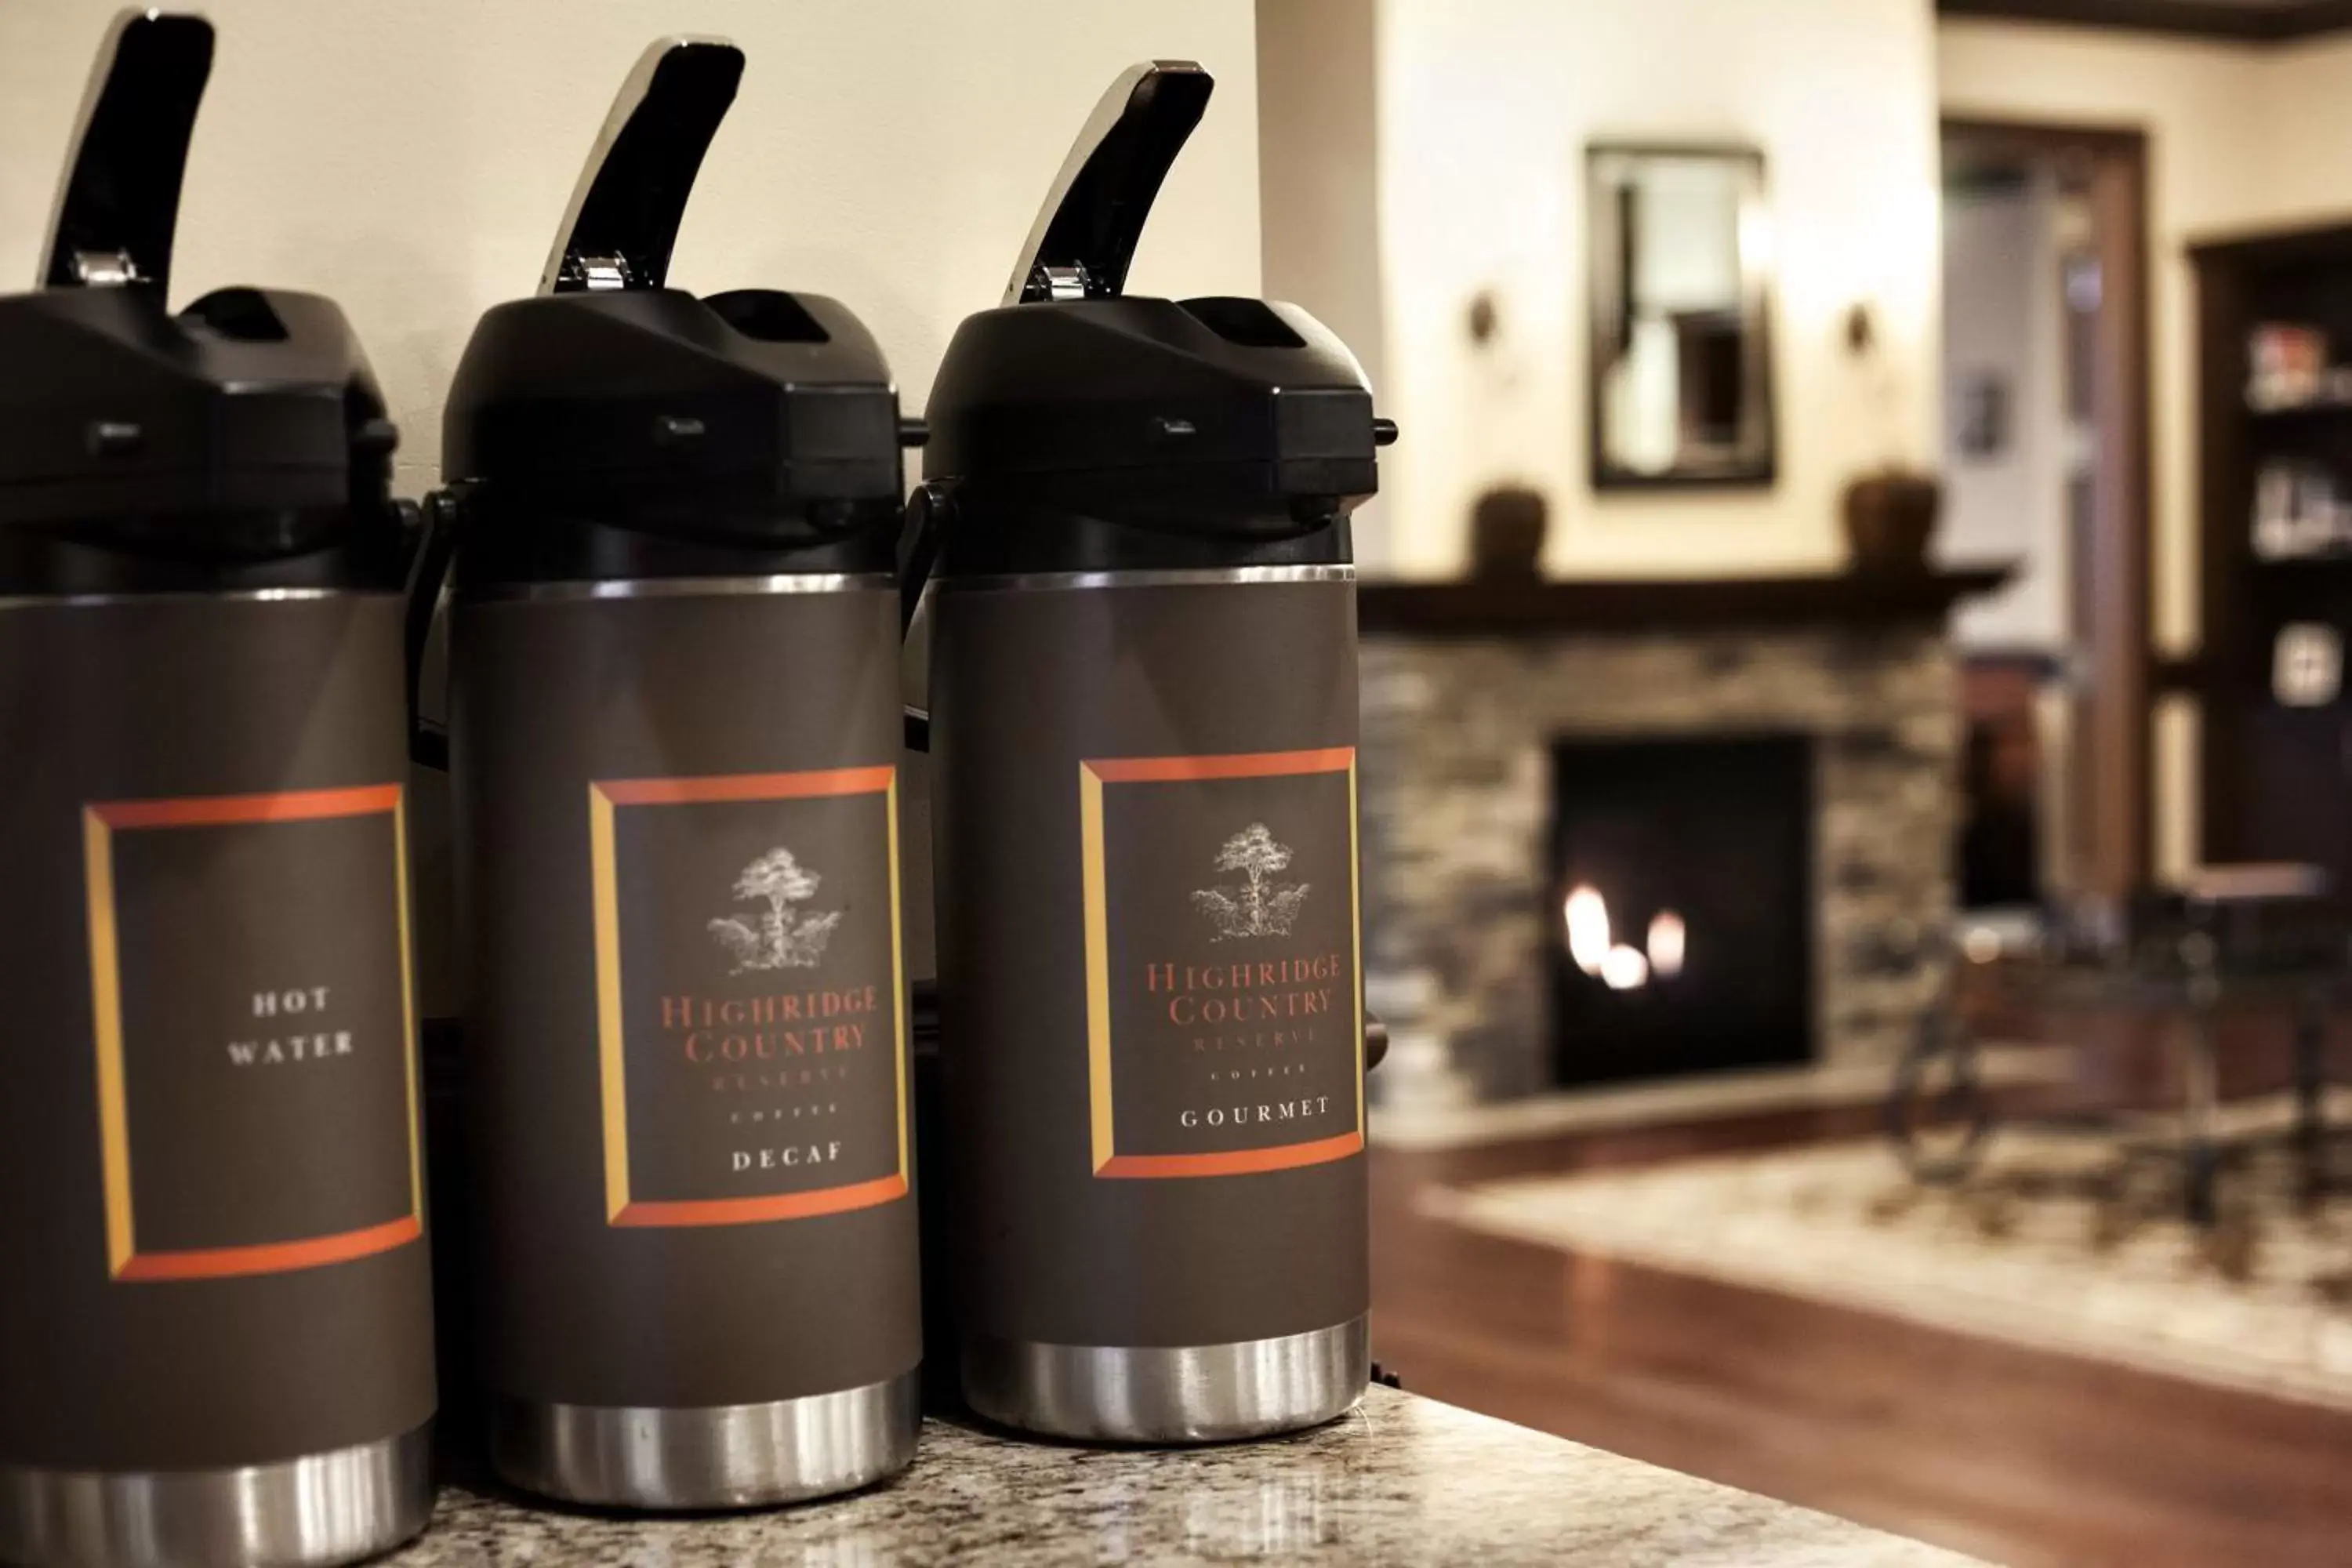 Non alcoholic drinks, Coffee/Tea Facilities in Country Inn & Suites by Radisson, York, PA